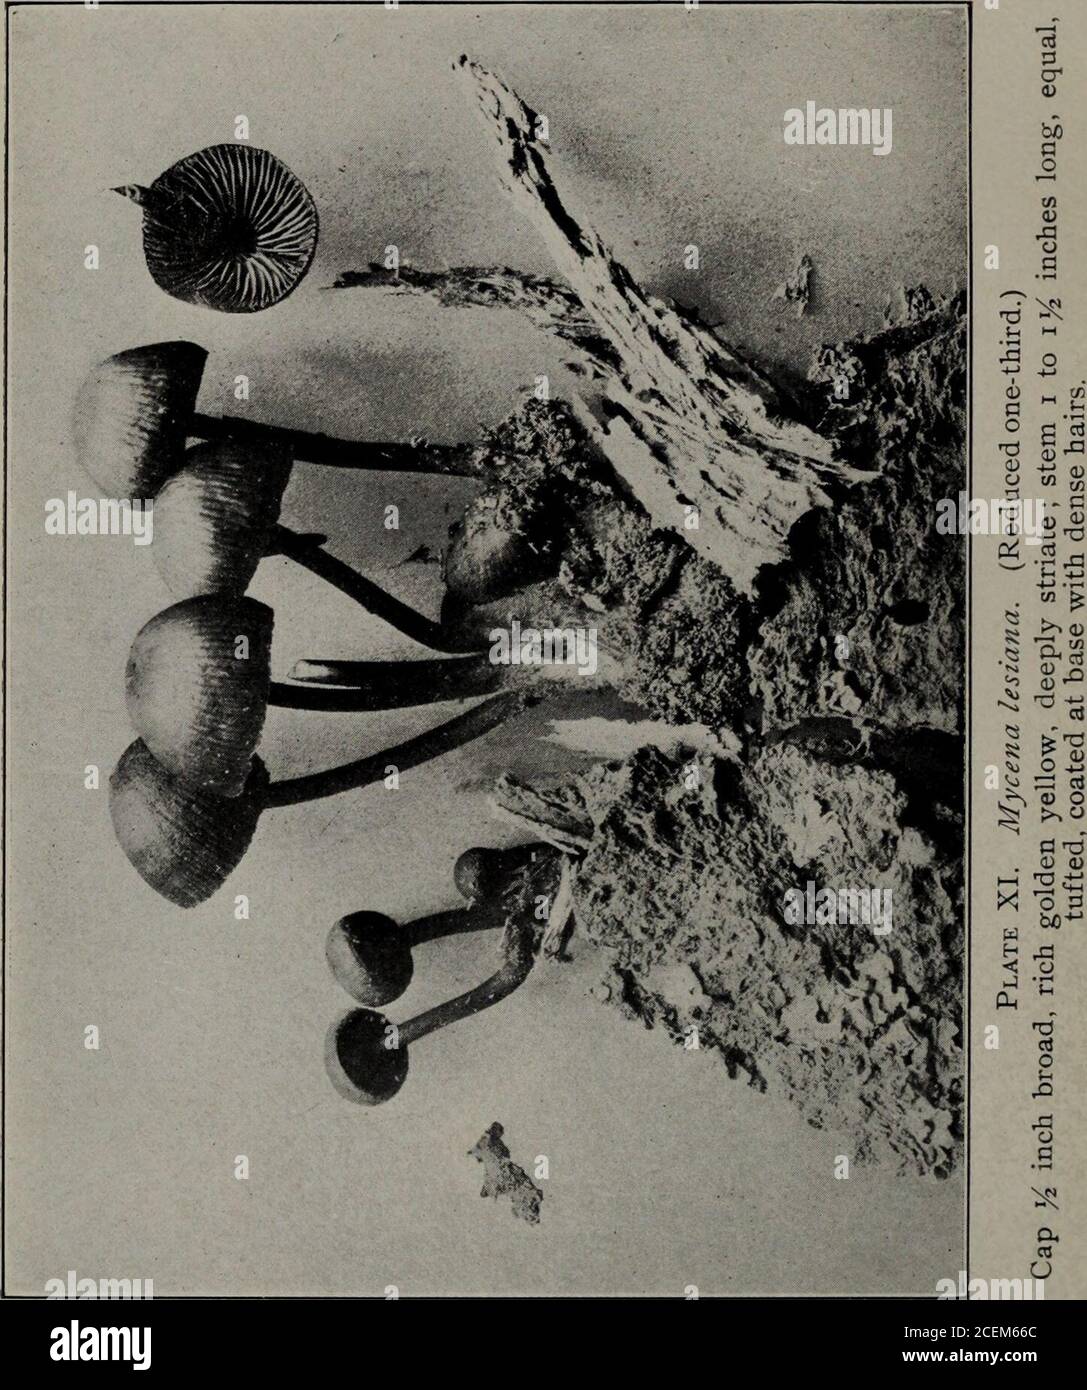 . Second report on the Hymeniales of Connecticut. Plate IX. Collybia zonata. (Natural size.)Cap )/2 inch toi]/z inches wide, dark brown, covered with dense fibrils, uneven,forming distinct zones, membranaceous ; stem even, to 2% inches long.. No. 15.] HYMEN I ALES OF CONNECTICUT. 15 7. Plants often growing on other fleshy fungi; stem with distinct tuber at base C. tuberosa Plants not growing on other fungi; stem without tubers 8 8. Stem grooved, striate with fibers 9 Stem not grooved 10 9. Stem even or narrowed towards the base; cap white, sometimes spotted with red C. maculata Stem narrowed t Stock Photo